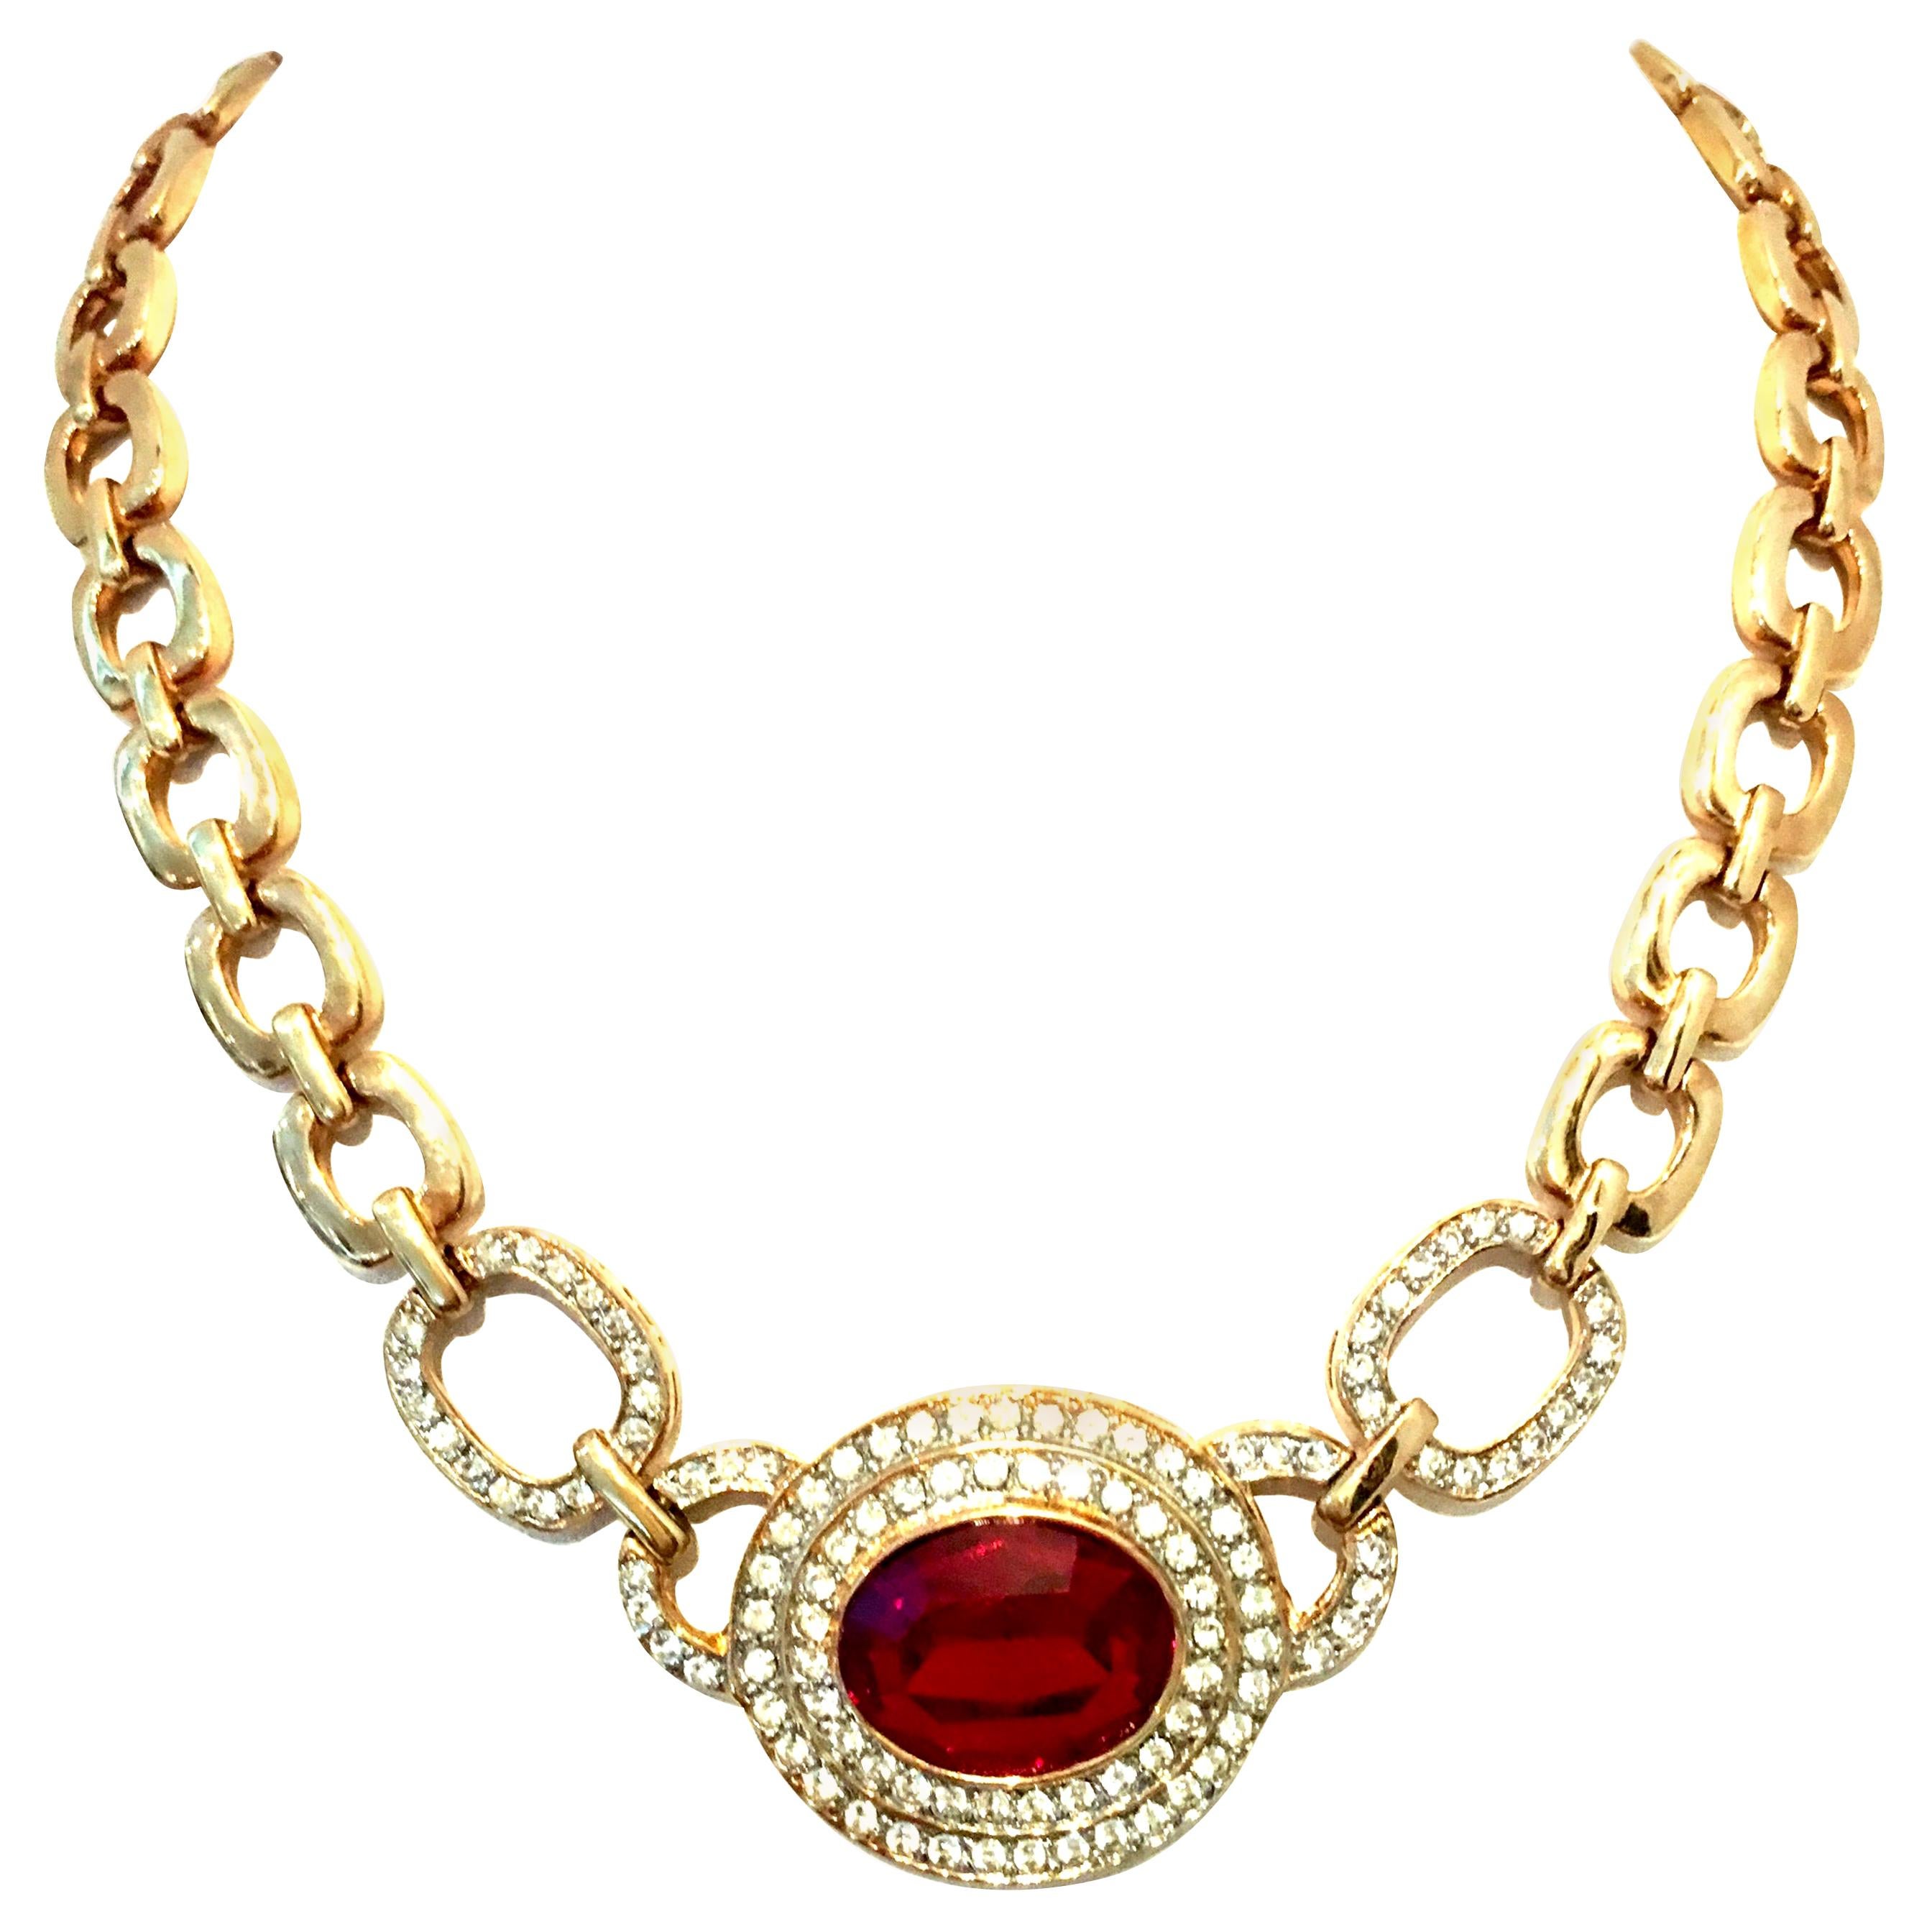 20th Century Christian Dior Style Gold & Austrian Crystal Choker Style Necklace